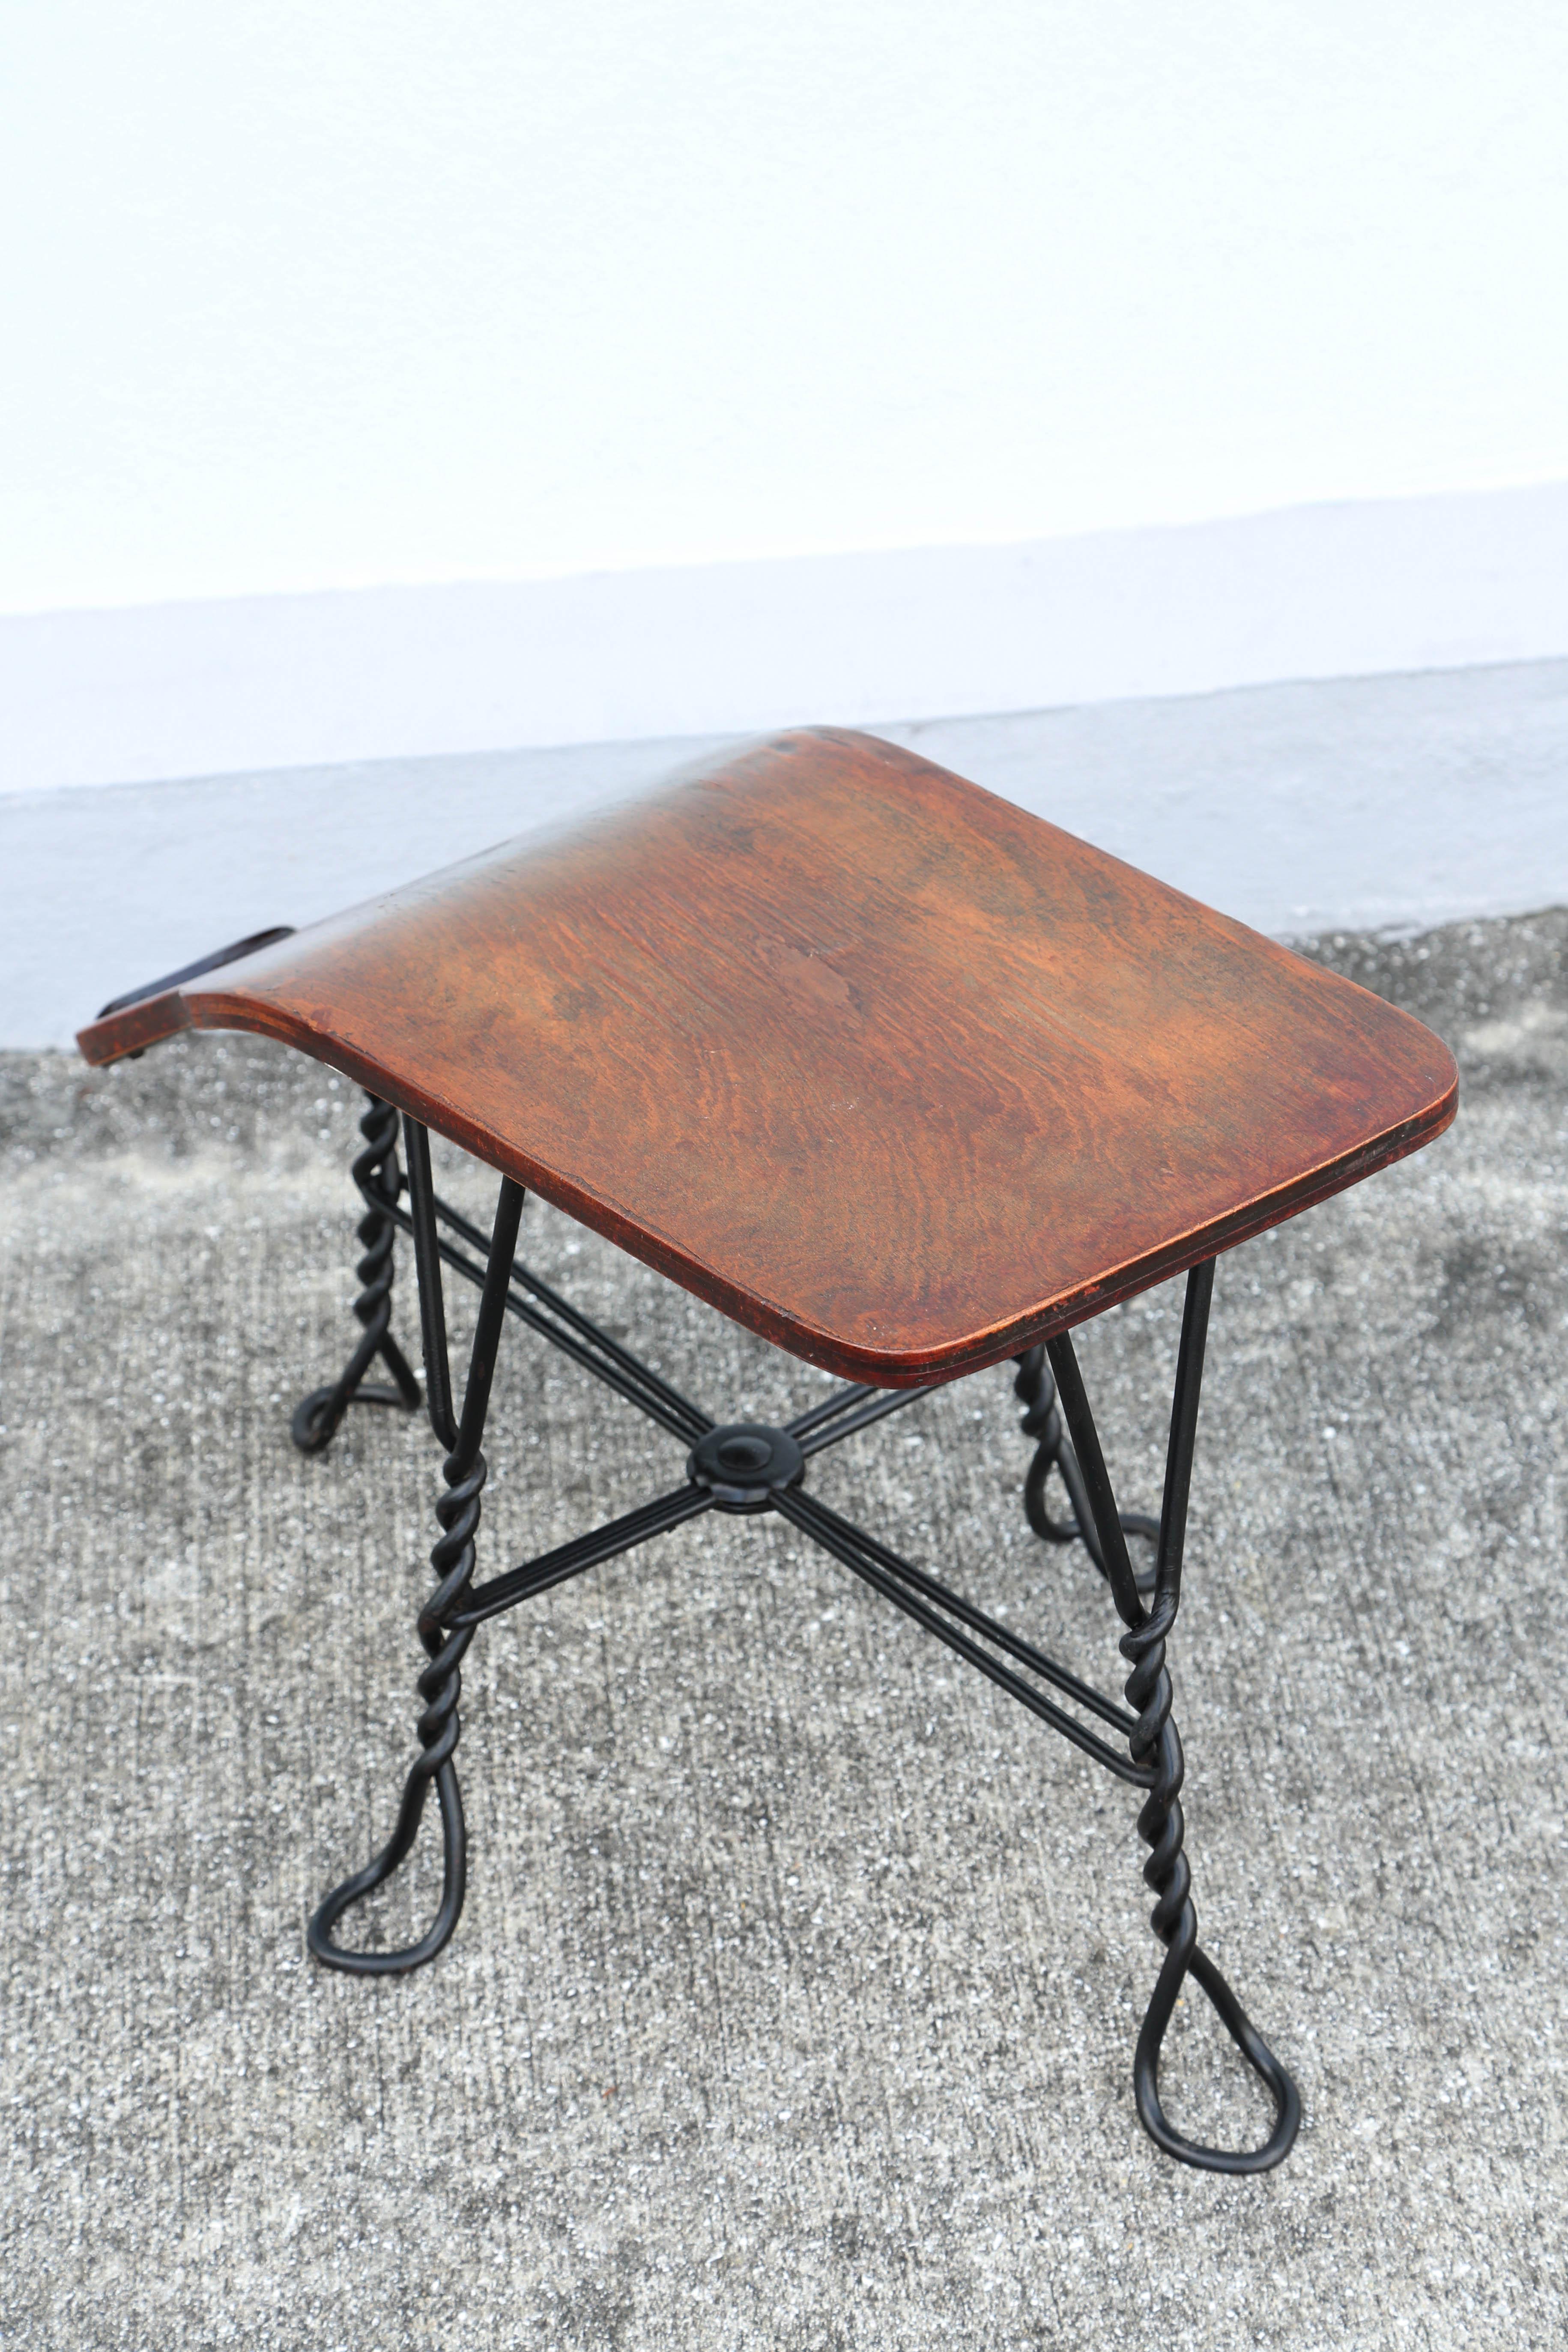 Antique Shoe Shine Stand In Good Condition For Sale In West Palm Beach, FL